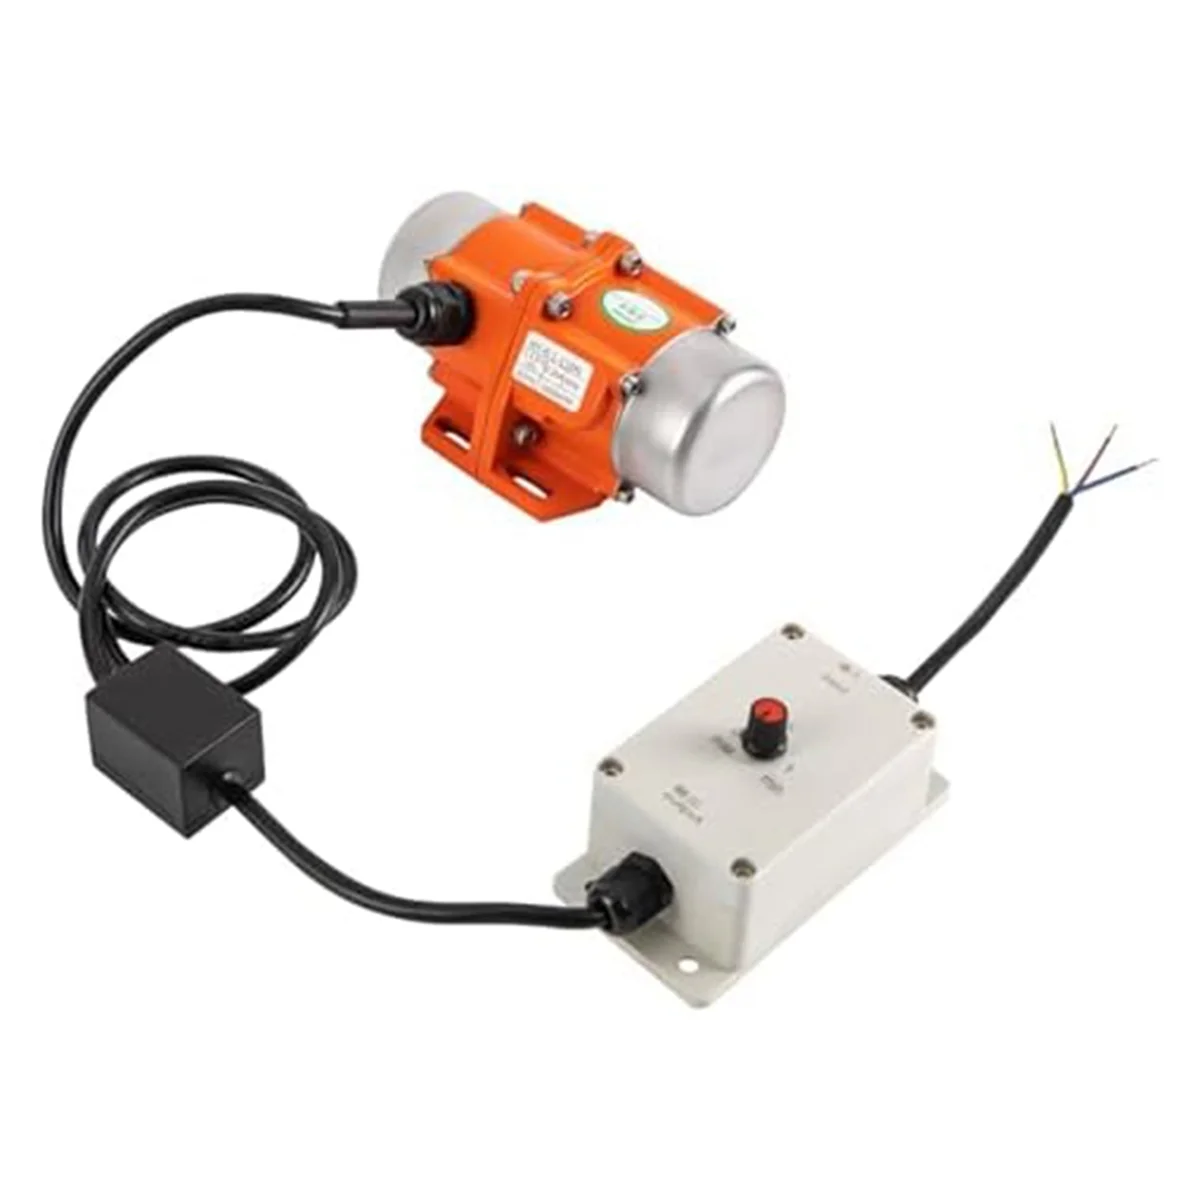 

Vibration Motor, 30W Vibrating Asynchronous Vibrator Vibration Motor with Speed Controller 110V 3600RPM Apply in Mining